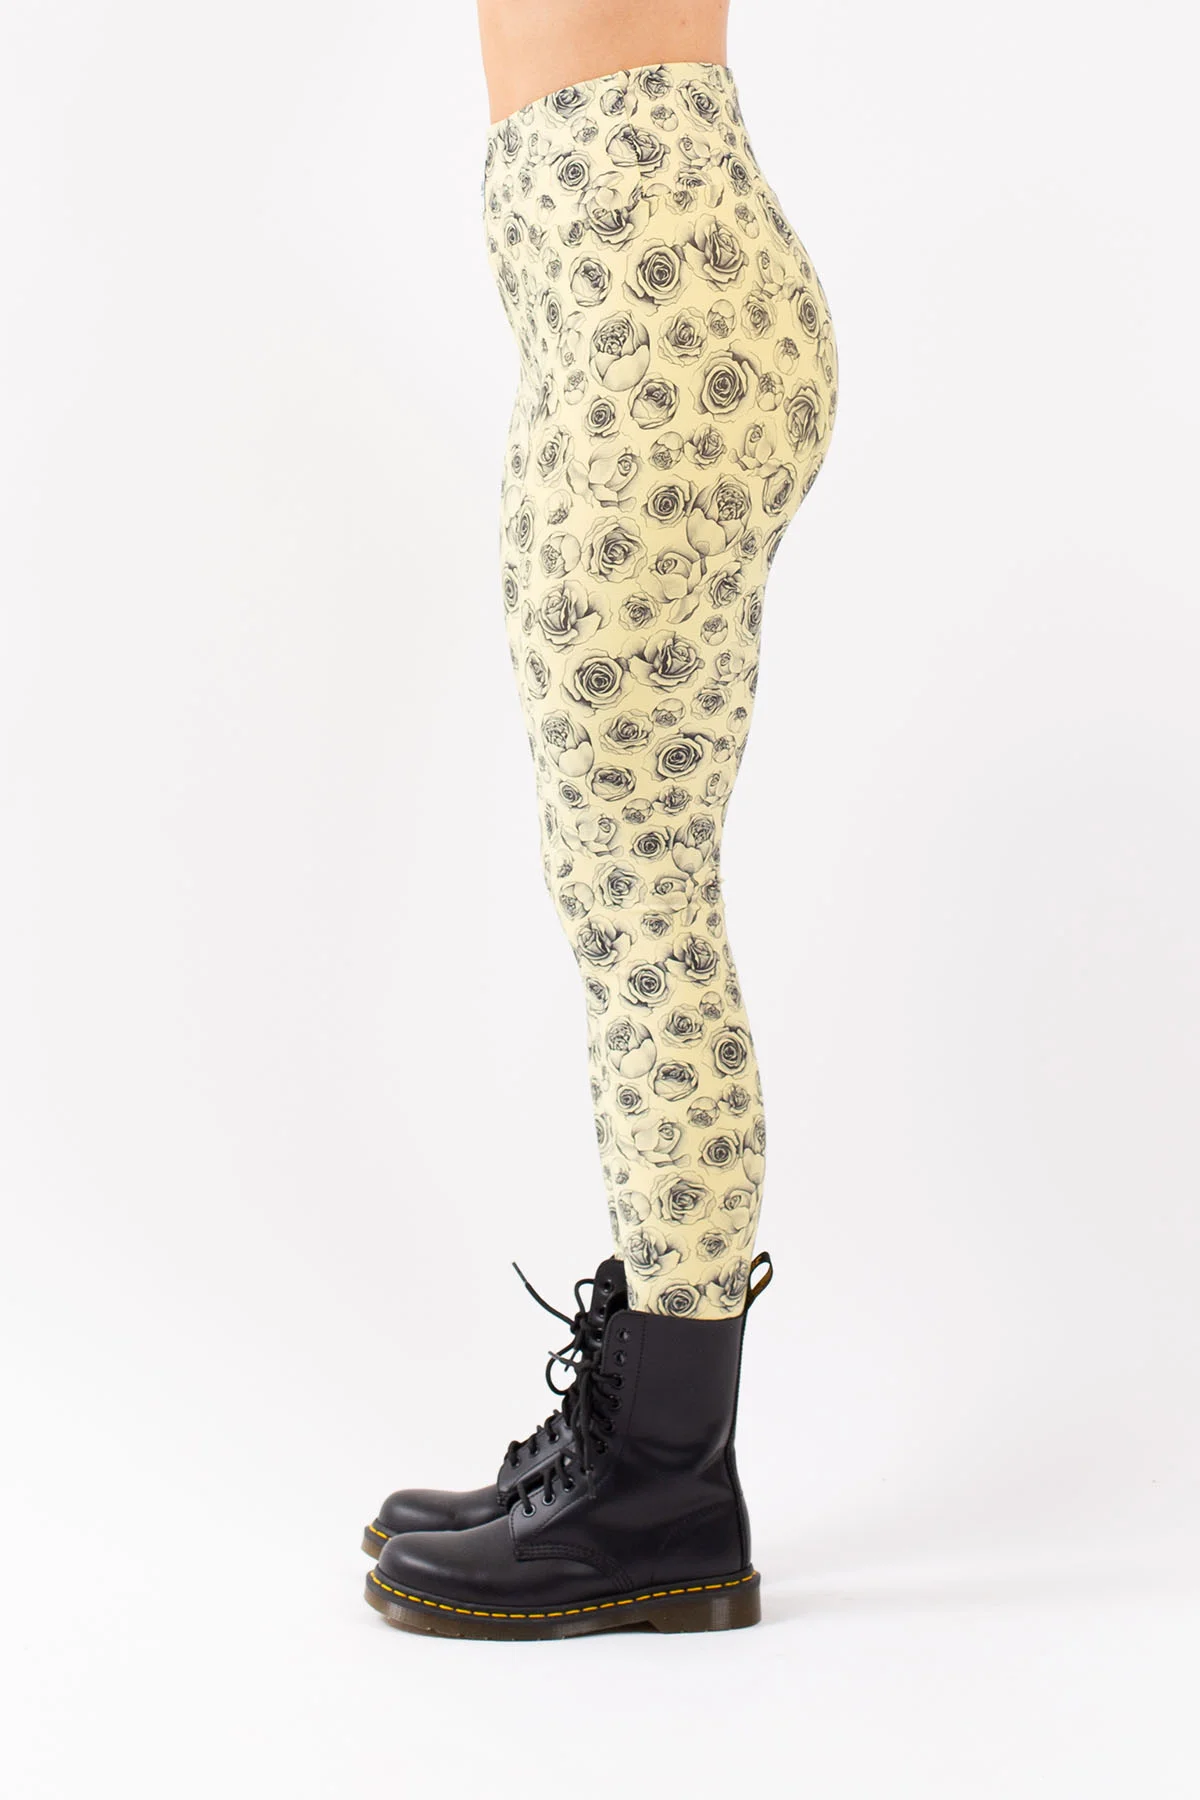 Icecold Tights - Yellow Charcoal Rose | XS